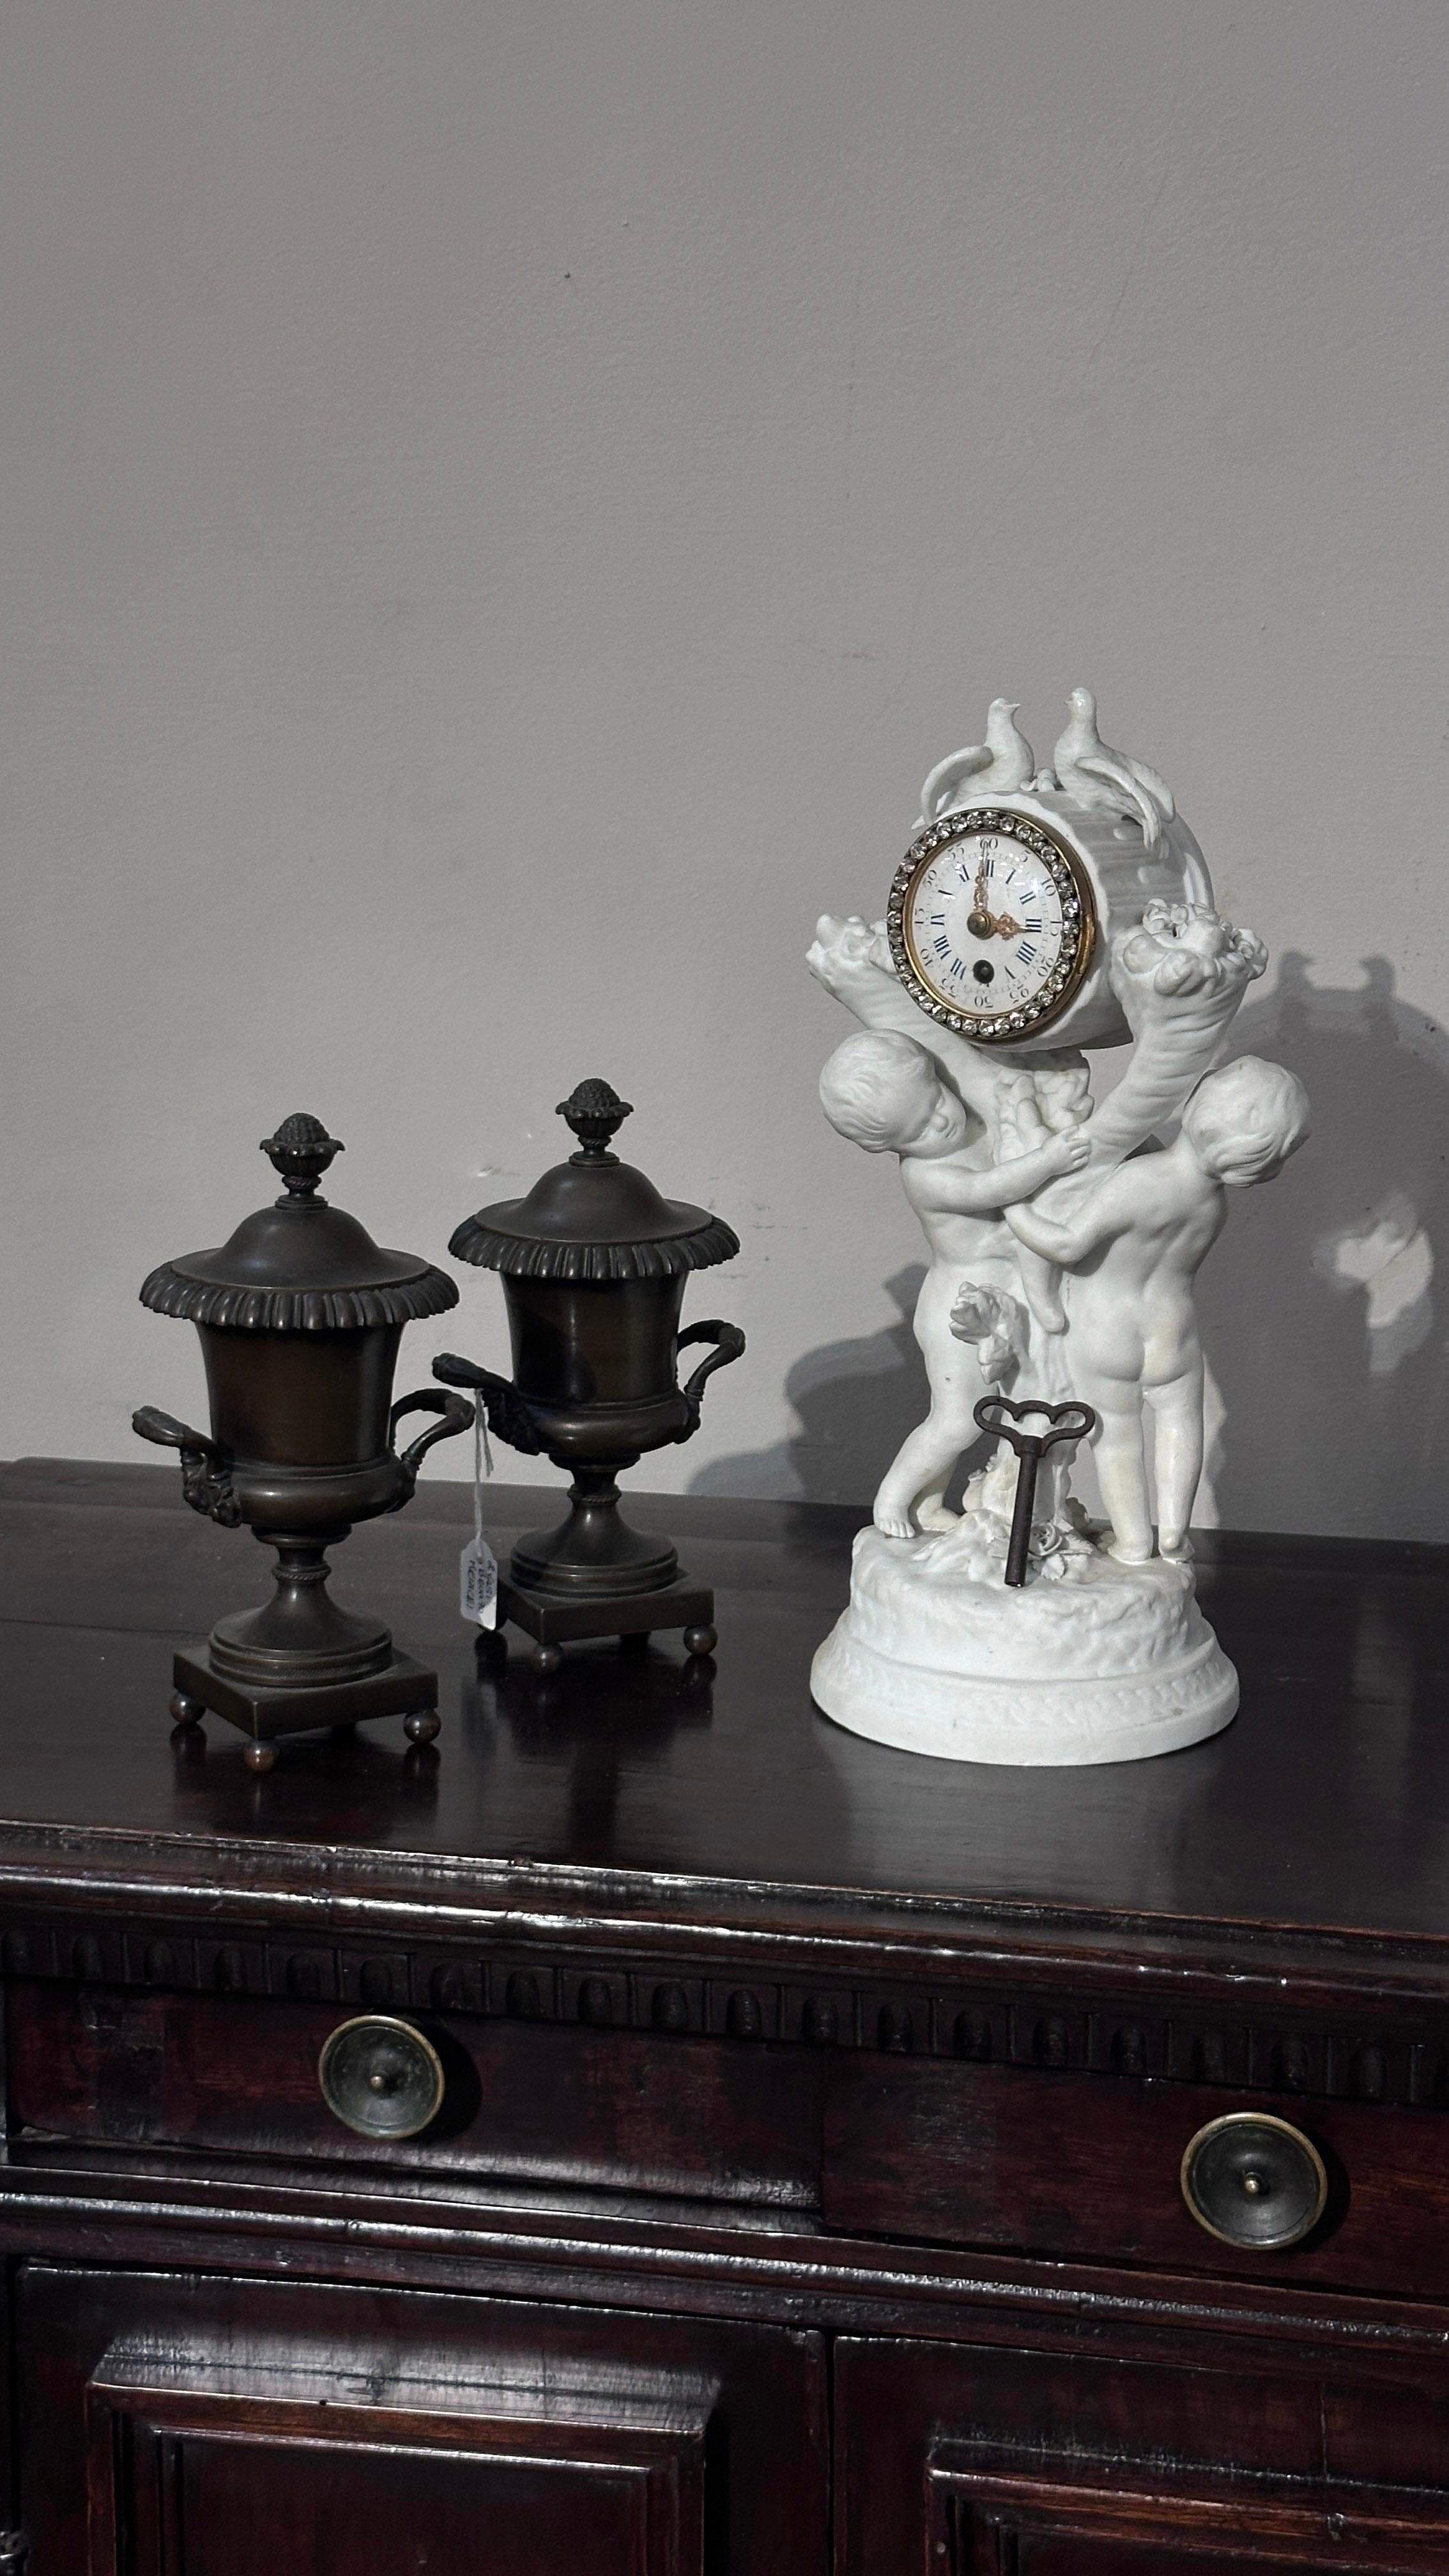 EARLY 19th CENTURY FRENCH PORCELAIN CLOCK  For Sale 2